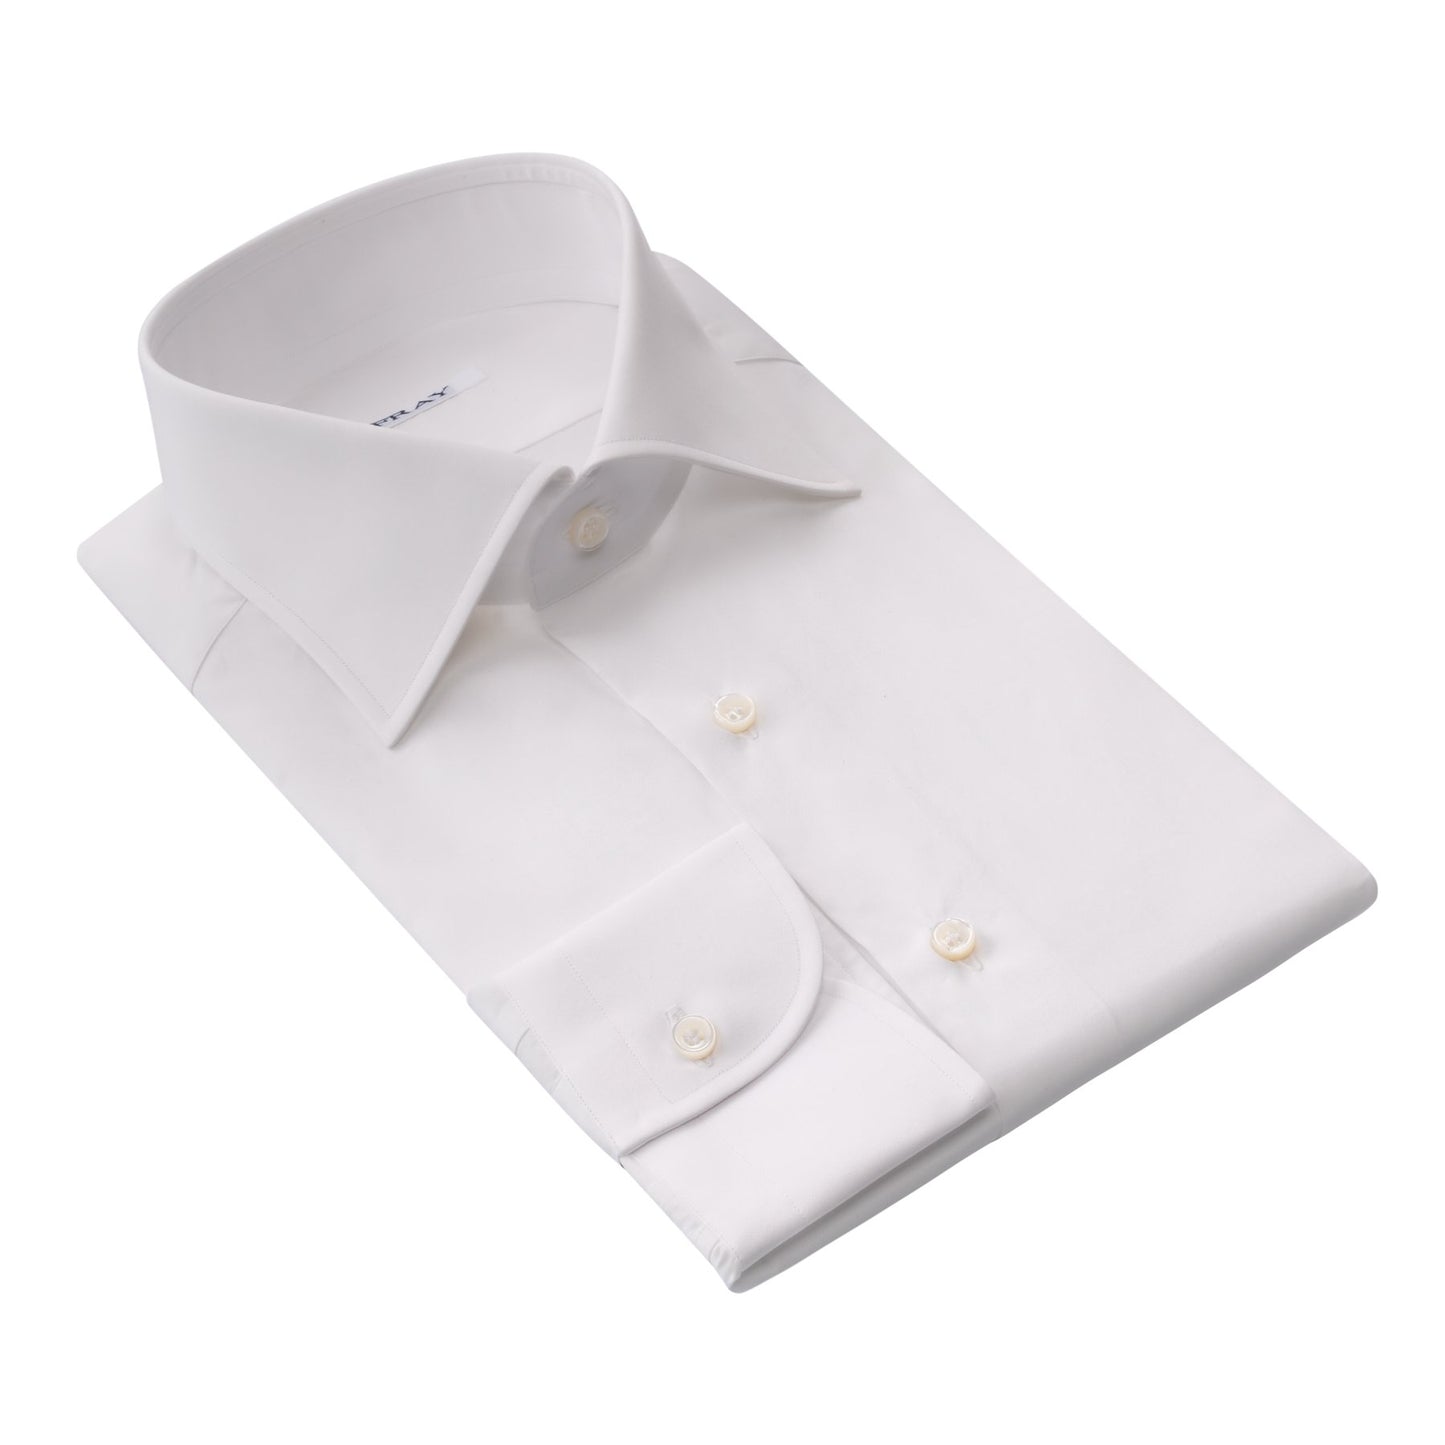 Fray Classic Cotton Shirt in White - SARTALE